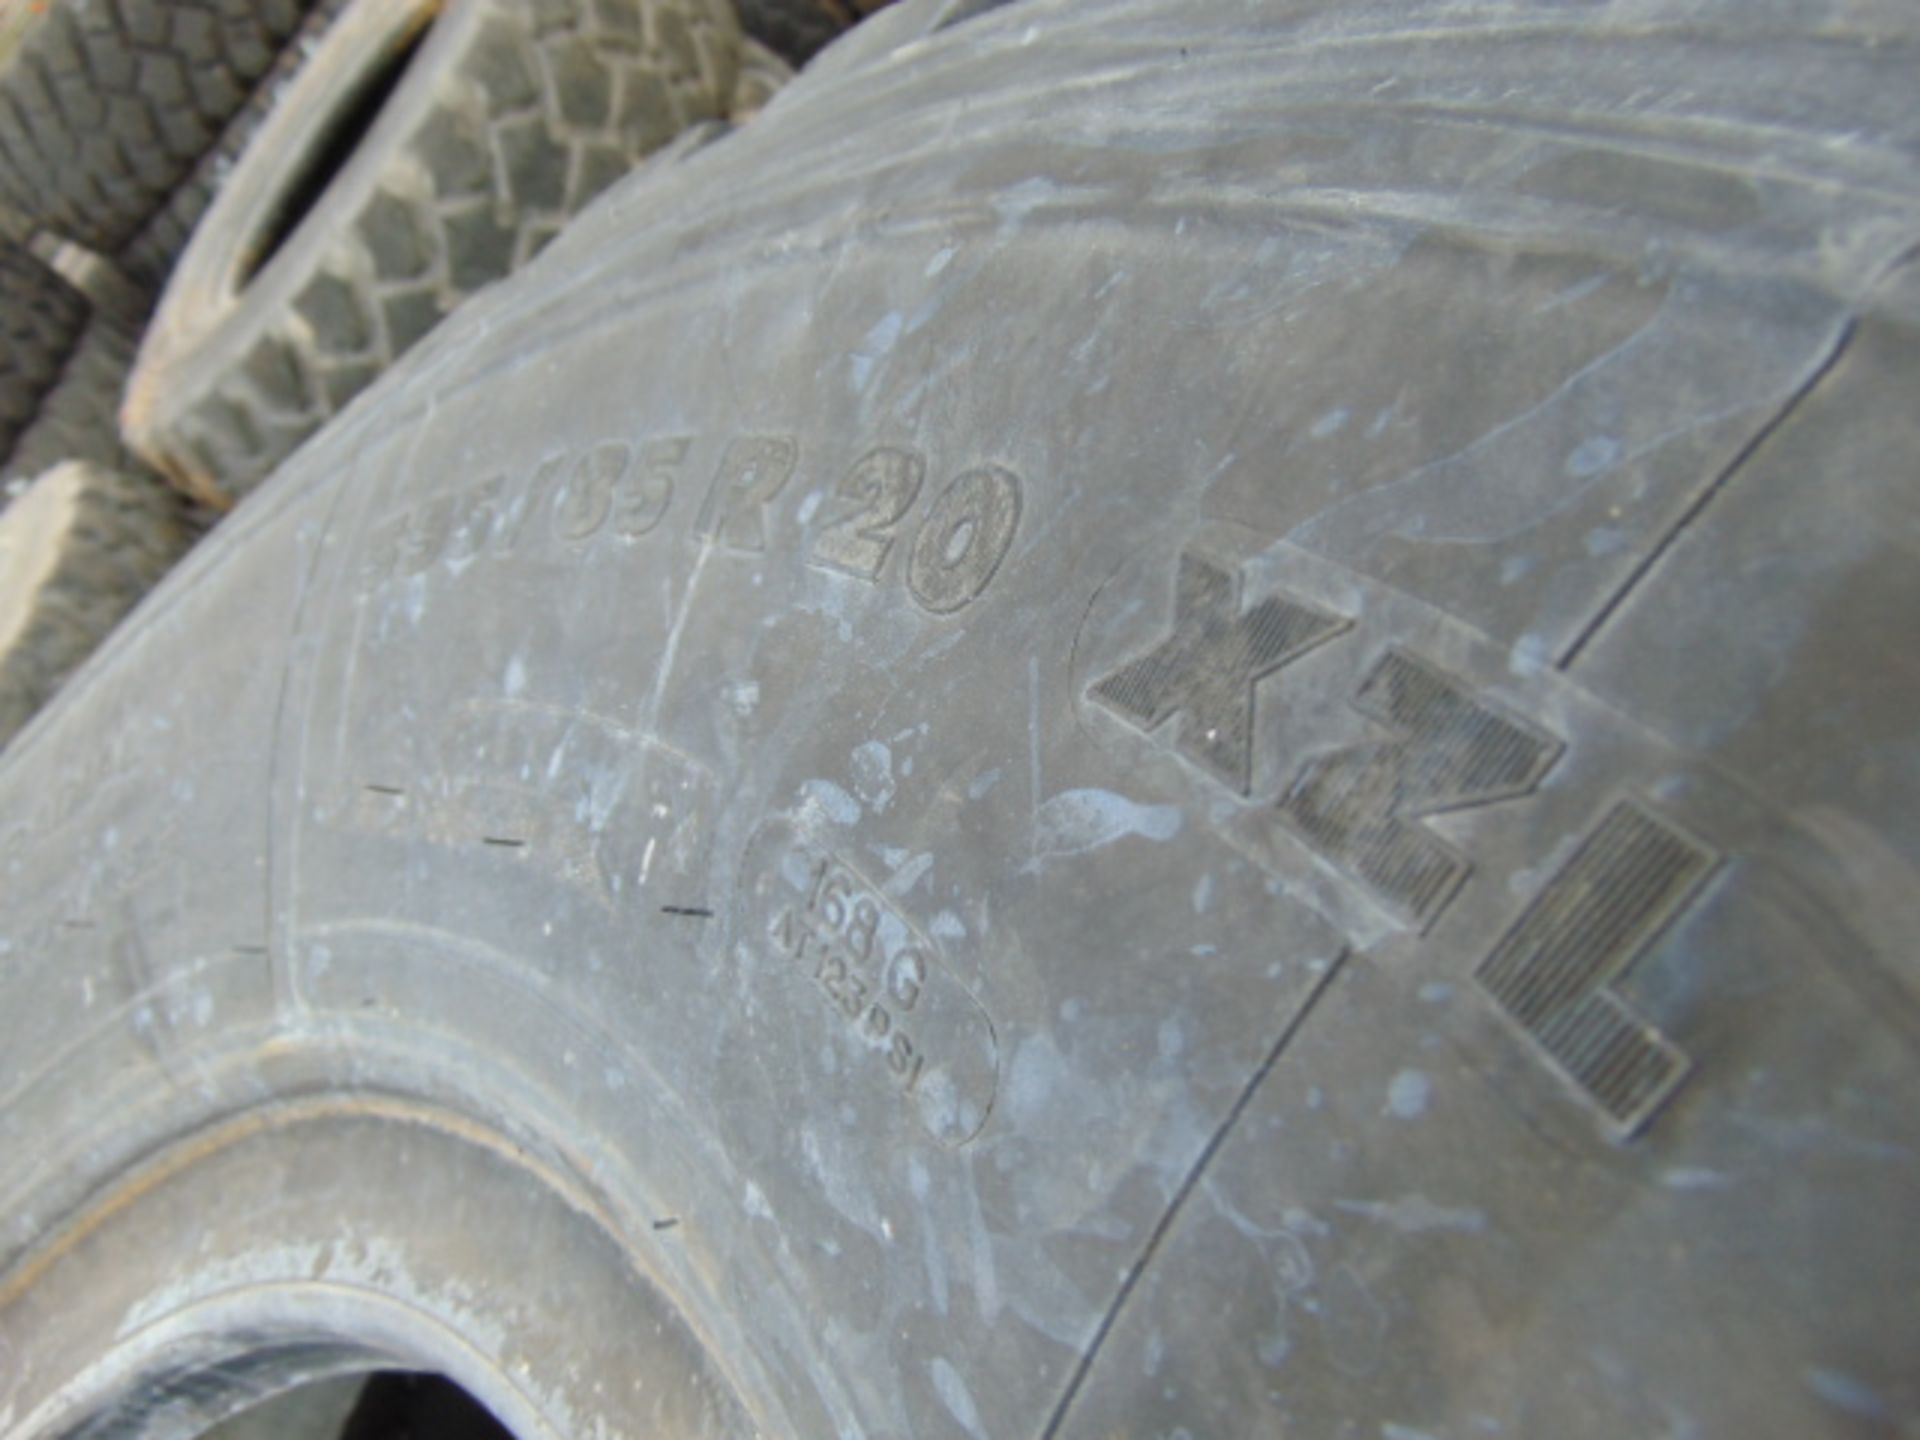 4 x Michelin XZL 395/85 R20 Tyres - Image 6 of 7